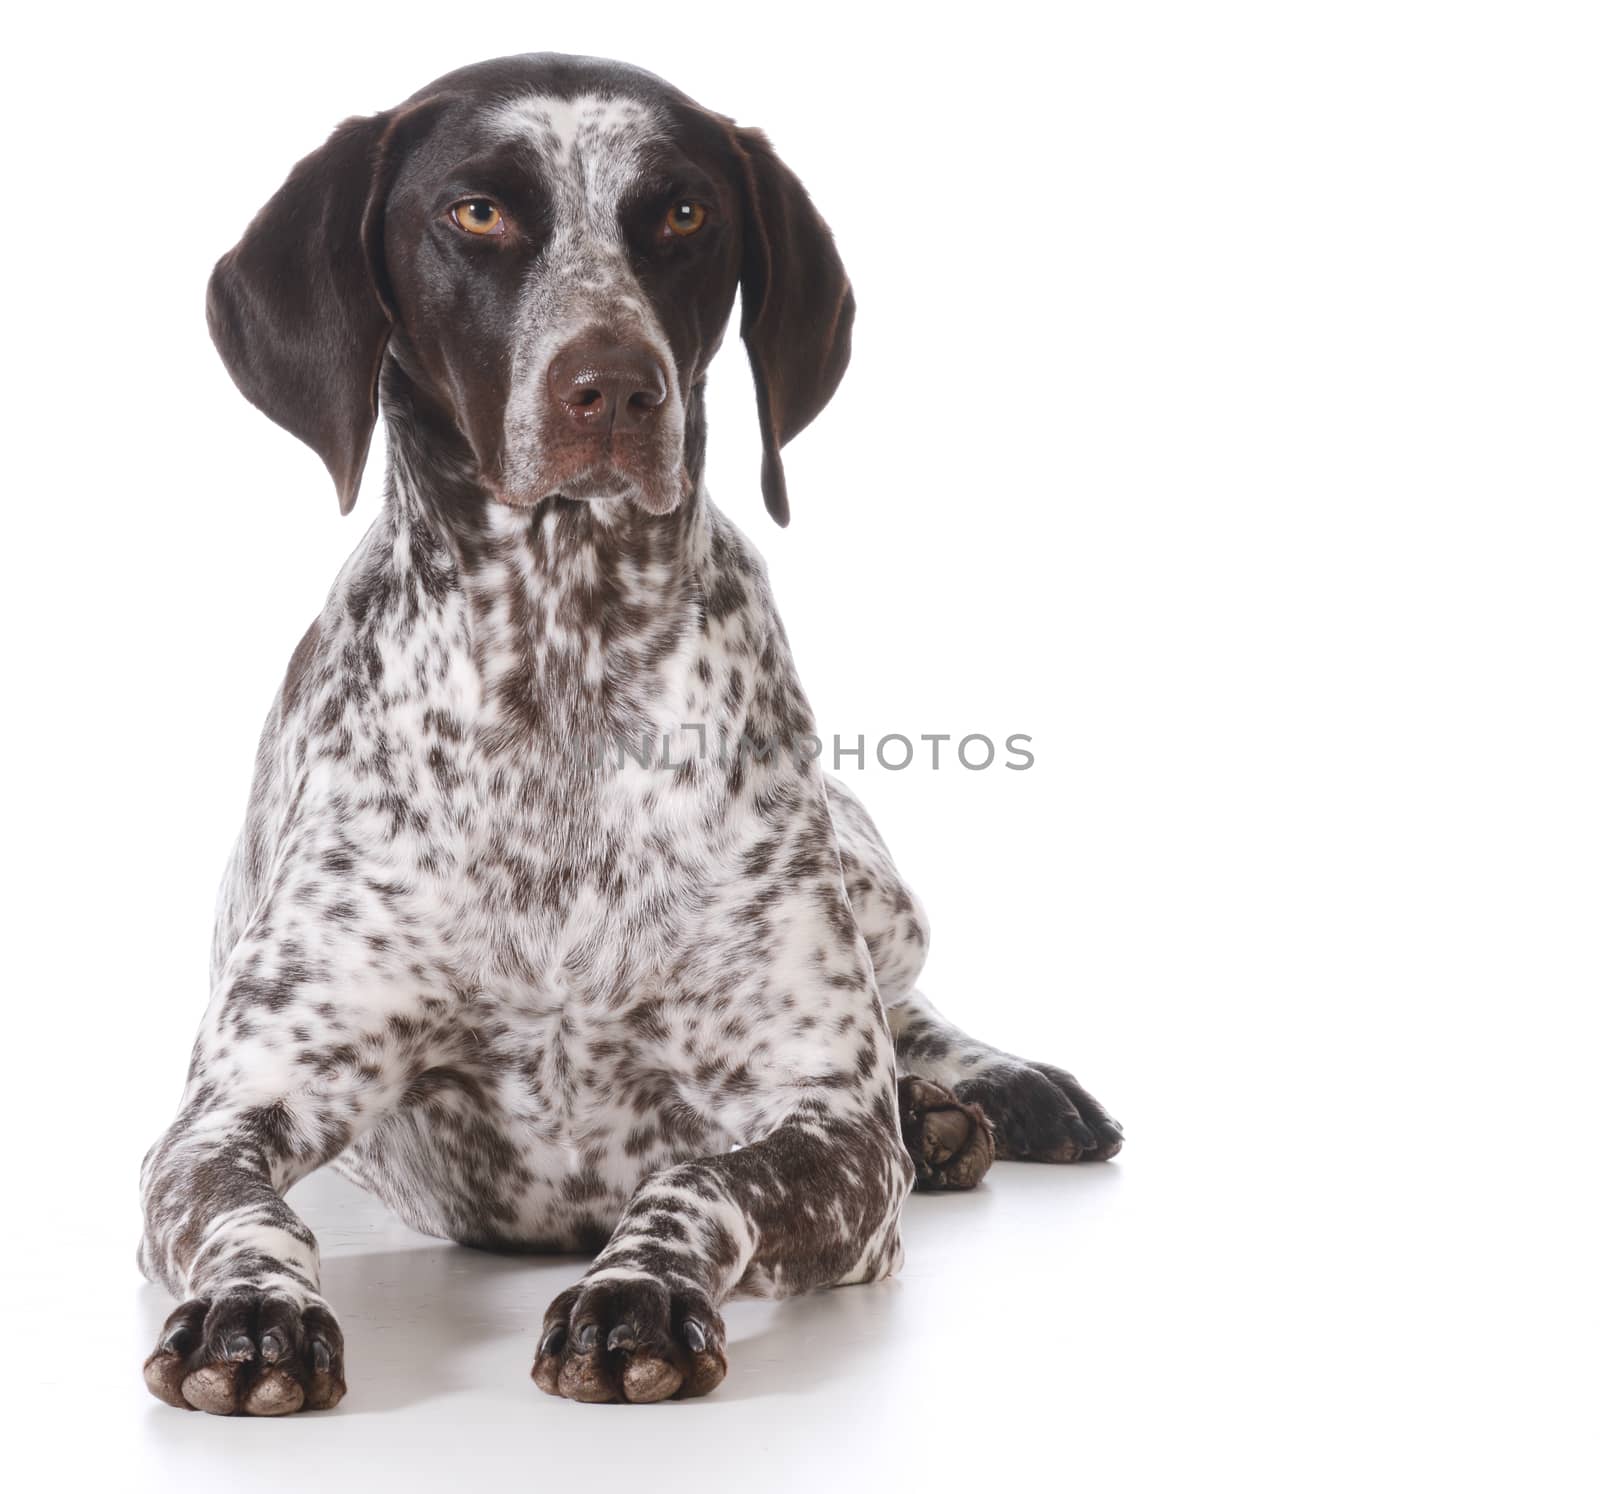 german shorthaired pointer laying down on white background